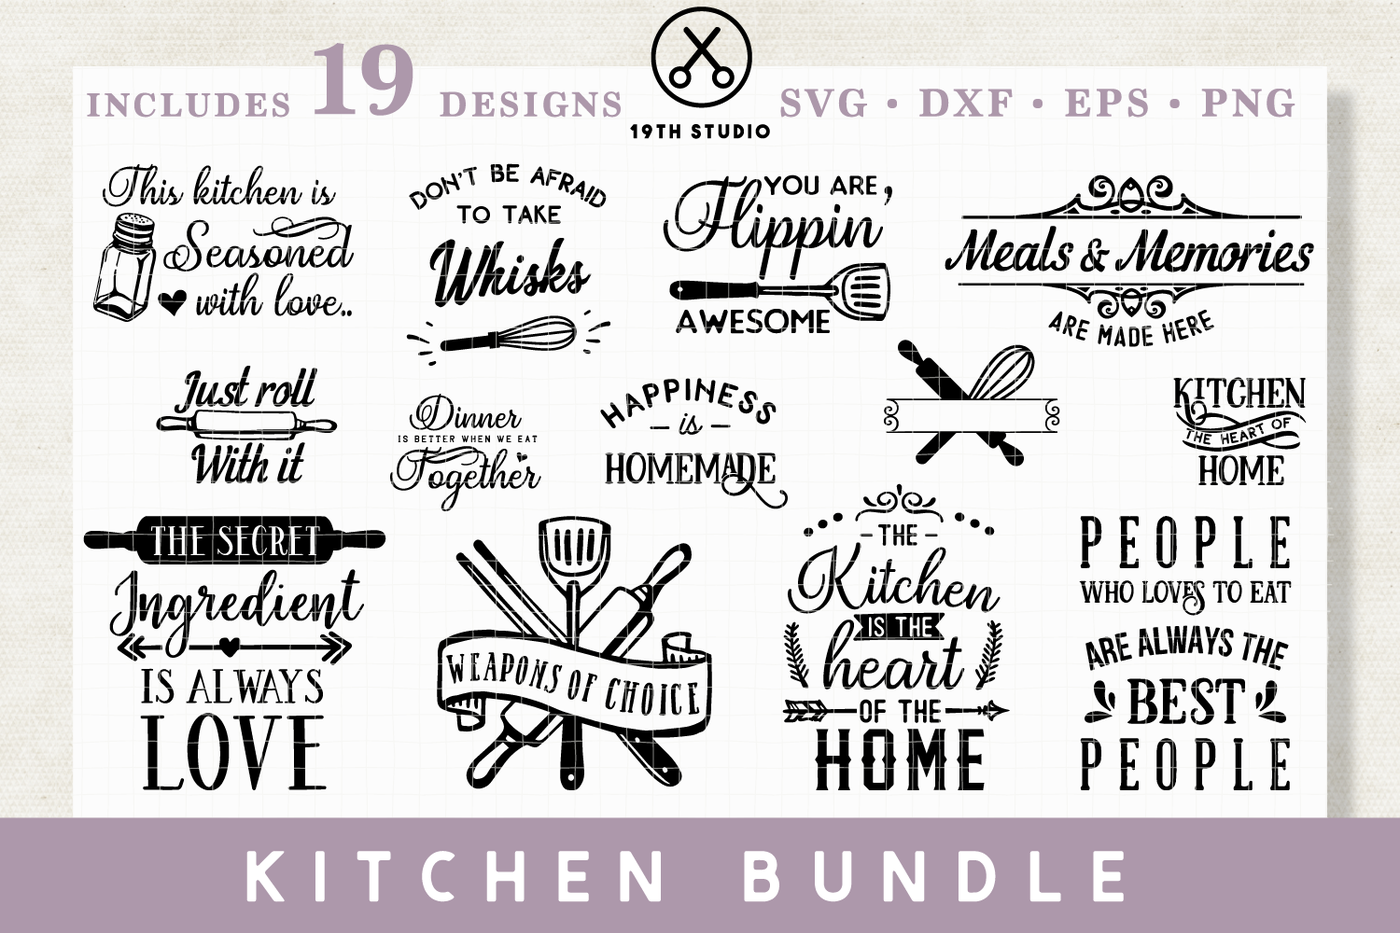 Download Dxf Cooking Svg Cricut People Who Love To Eat Paper Cut Cutting File Kitchen Label Silhouette Cameo Eps Kitchen Sign Funny Kitchen Clip Art Image Files Craft Supplies Tools Deshpandefoundationindia Org